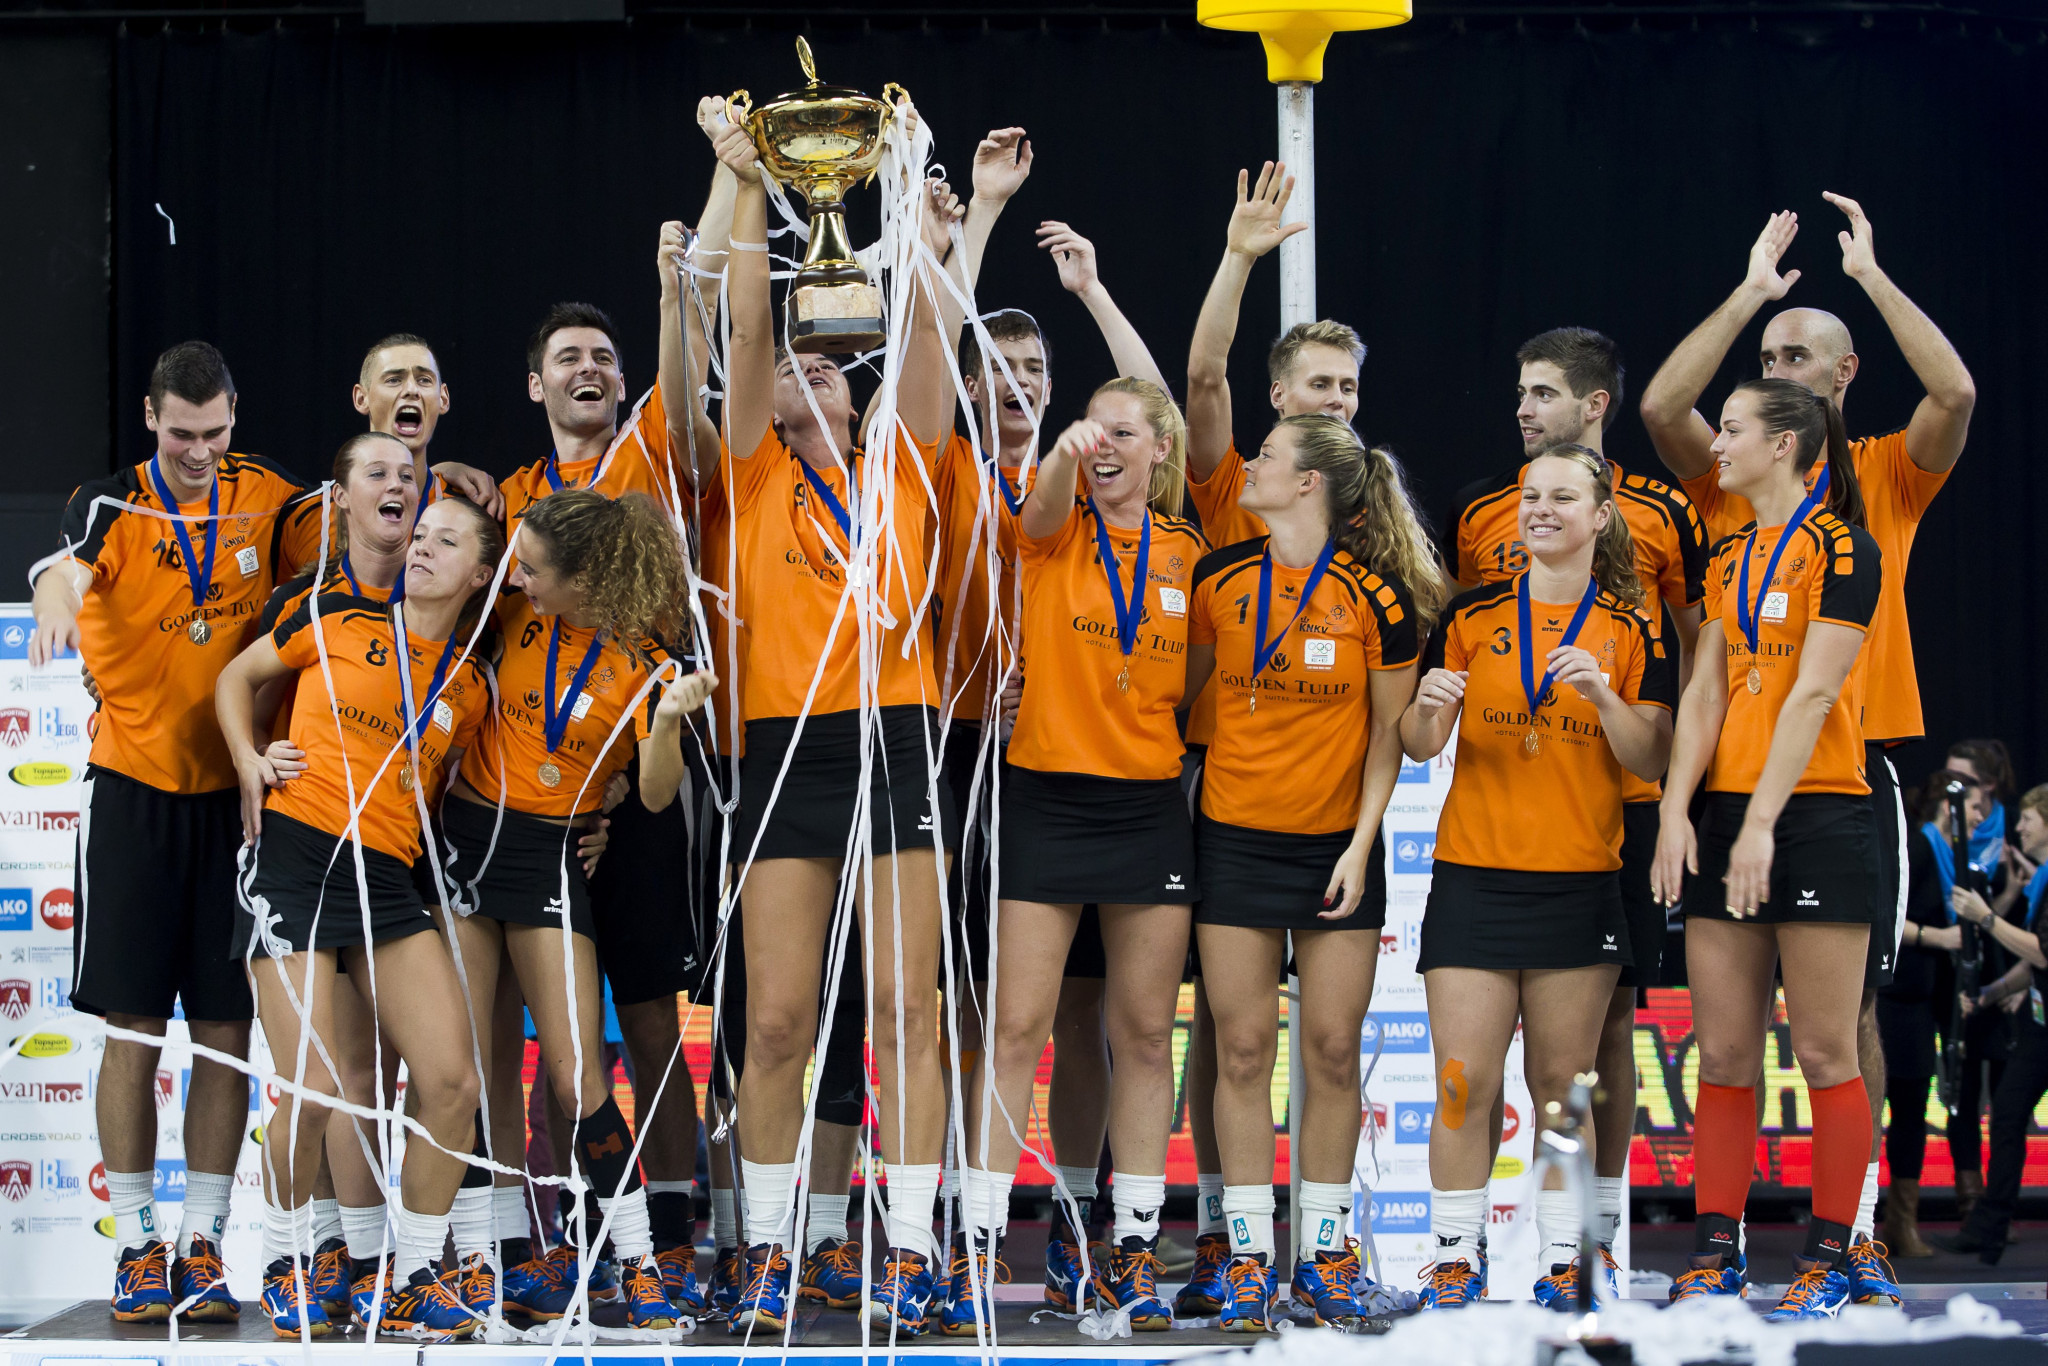 The International Korfball Federation has revealed the tournament format for this year's World Championship in Durban ©Getty Images